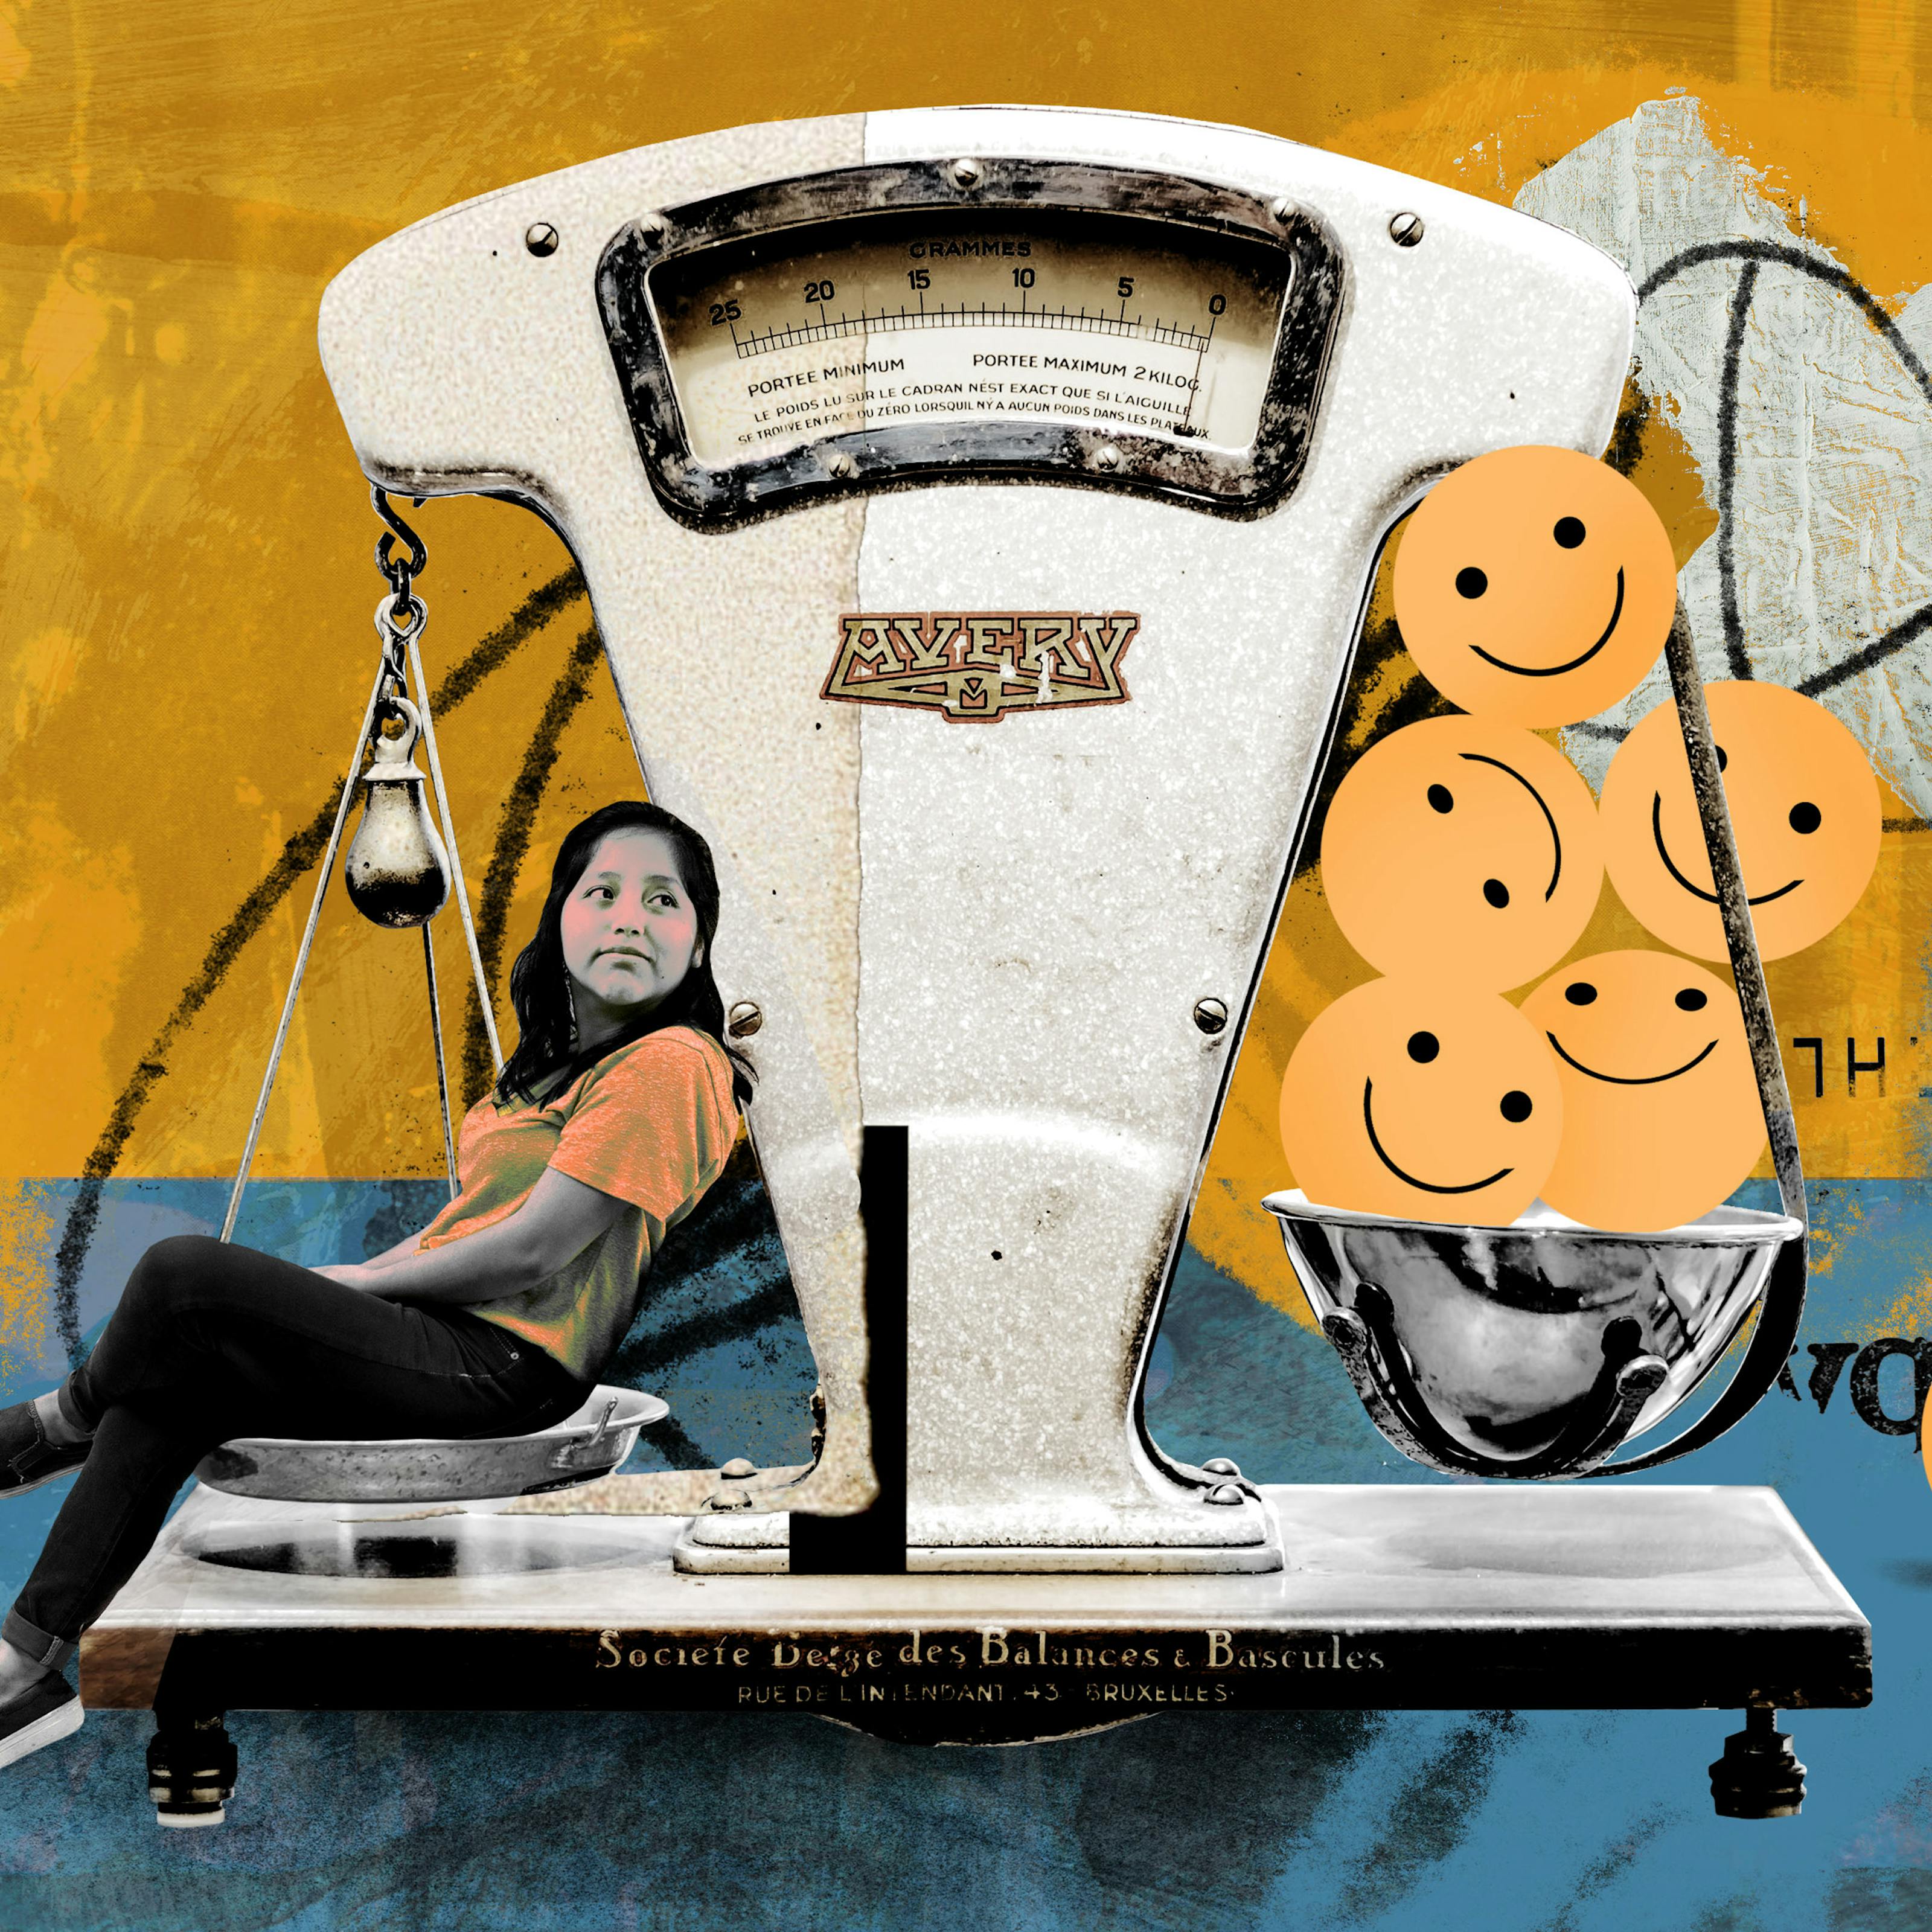 Colourful collage artwork with various elements.

The central element is a two-sided balance scale. In one of the measuring cups there is an image of a young woman sitting, she is wearing an orange t-shirt and black jeans. In the other cup are some smiley faces, one of them has fallen towards the ground. This side of the scale is higher than the side with the woman in it. 

Behind the scales, the top half of the background is yellow and has a white cross sign painted on it. The bottom half is blue, with some text written on it. 